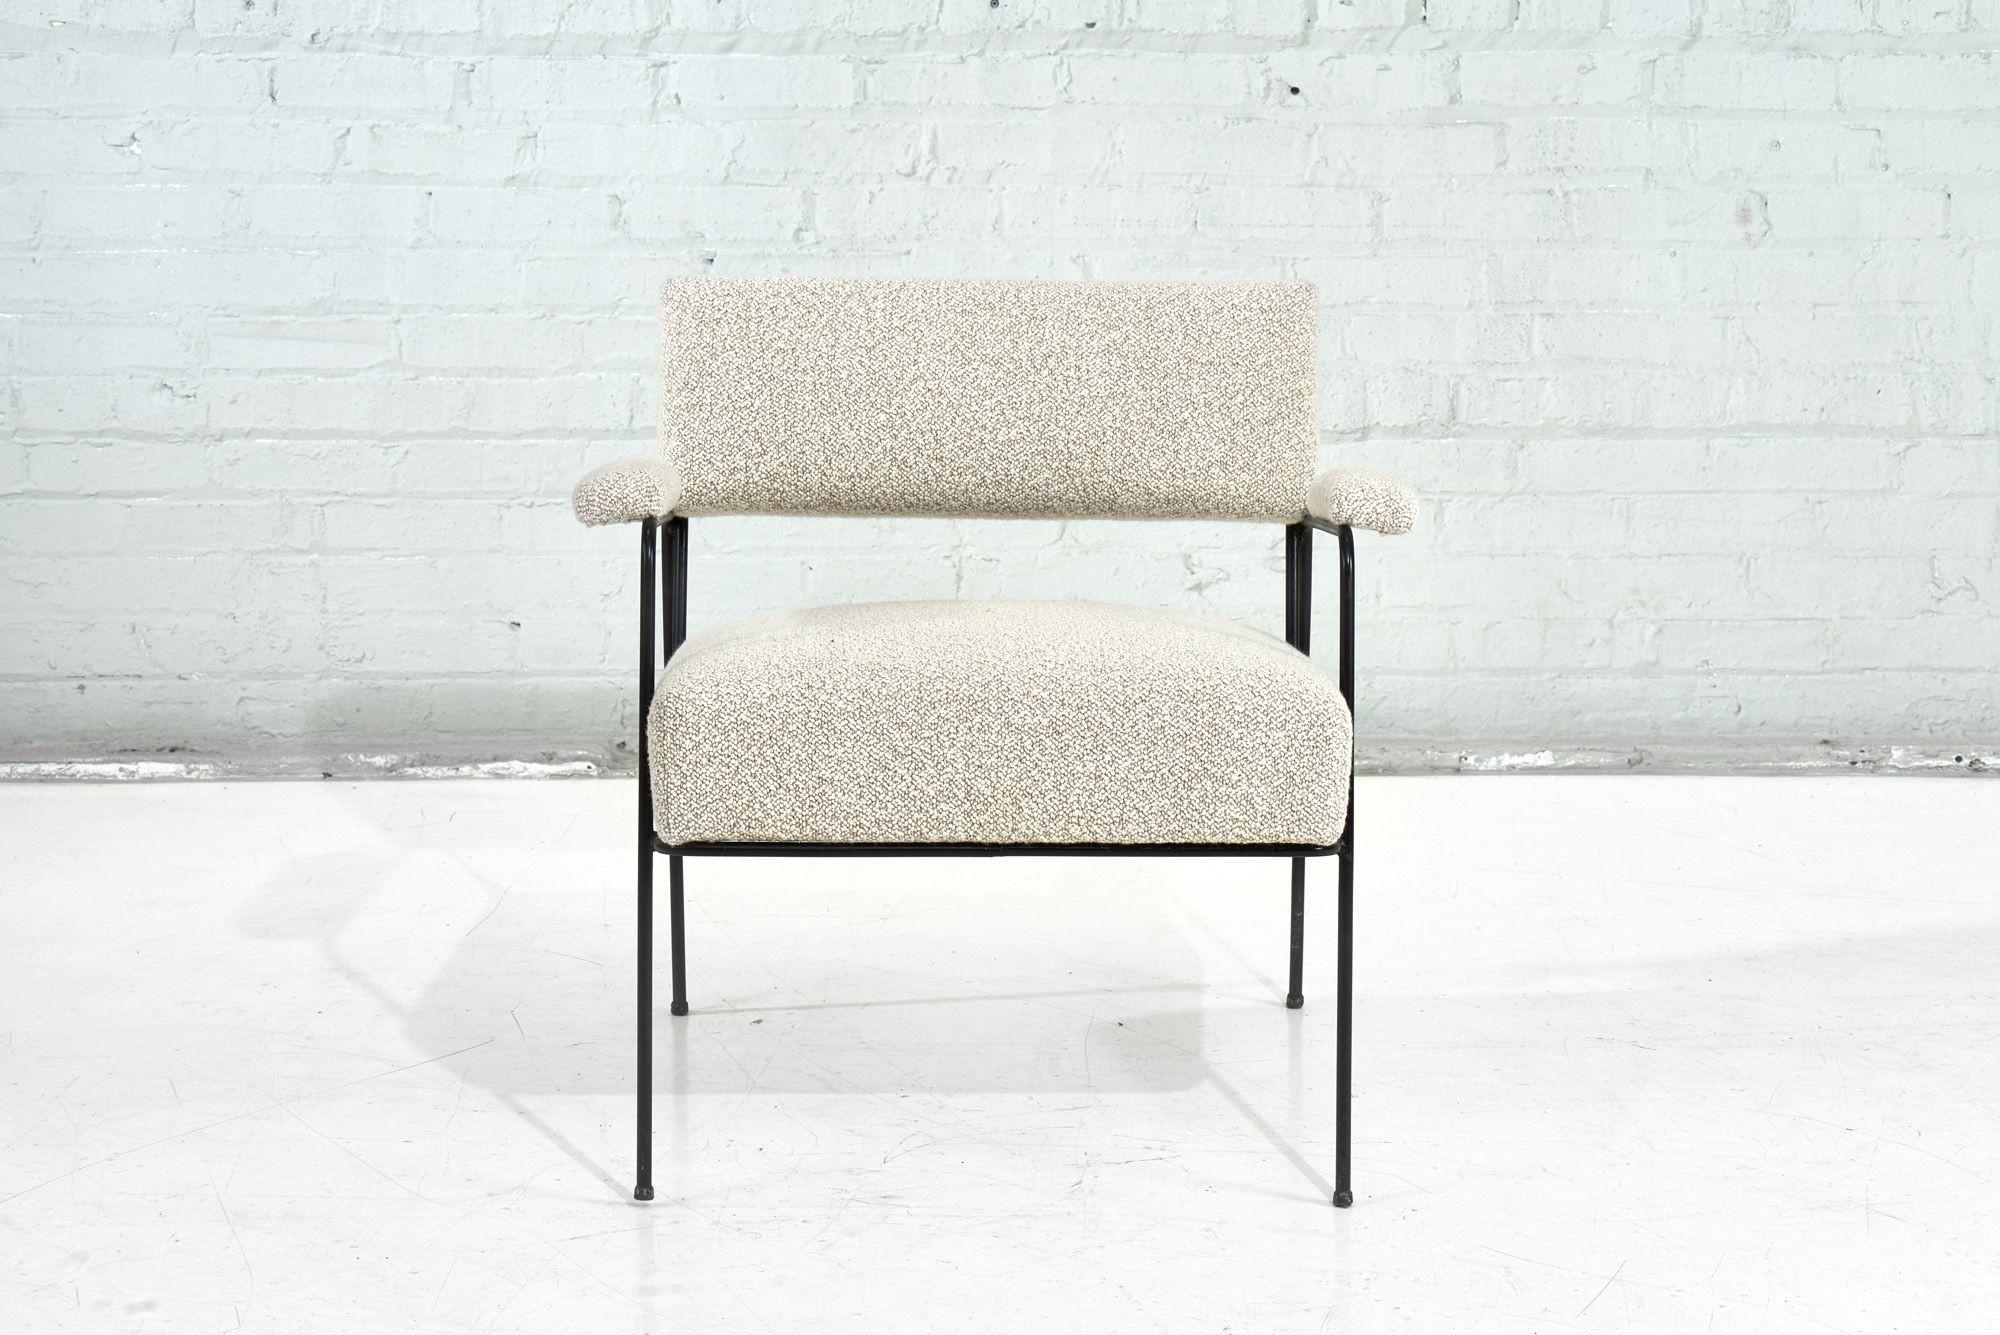 Milo Baughman for Pacific Iron Lounge Chair, 1950. Chair has been completely restored and reupholstered in an oatmeal color nubby boucle.

